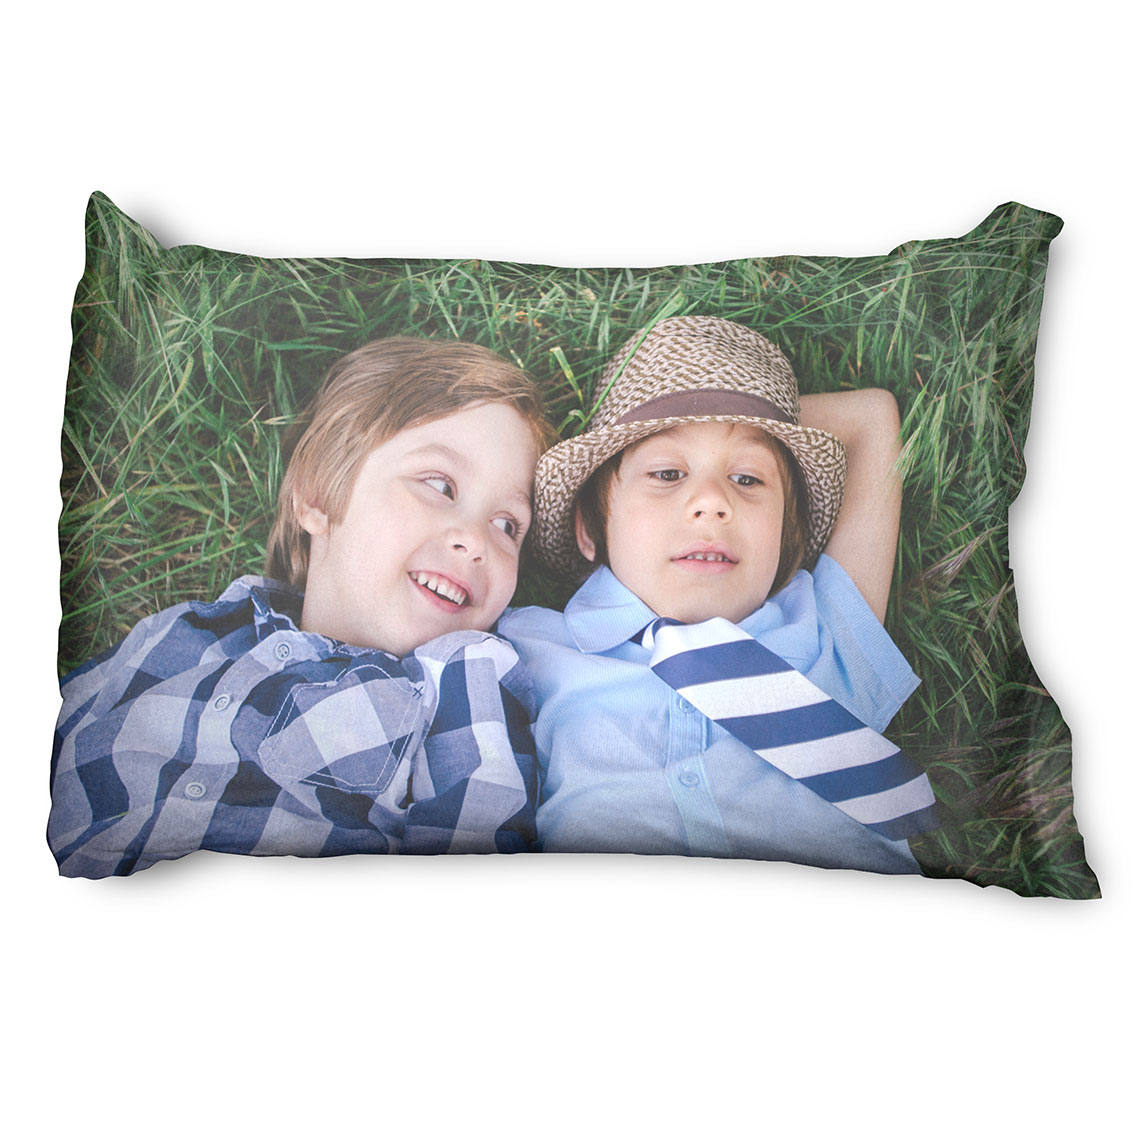 Personalised Photo Pillowcase Cushion Pillow Case Cover with Insert up to 3 pic 